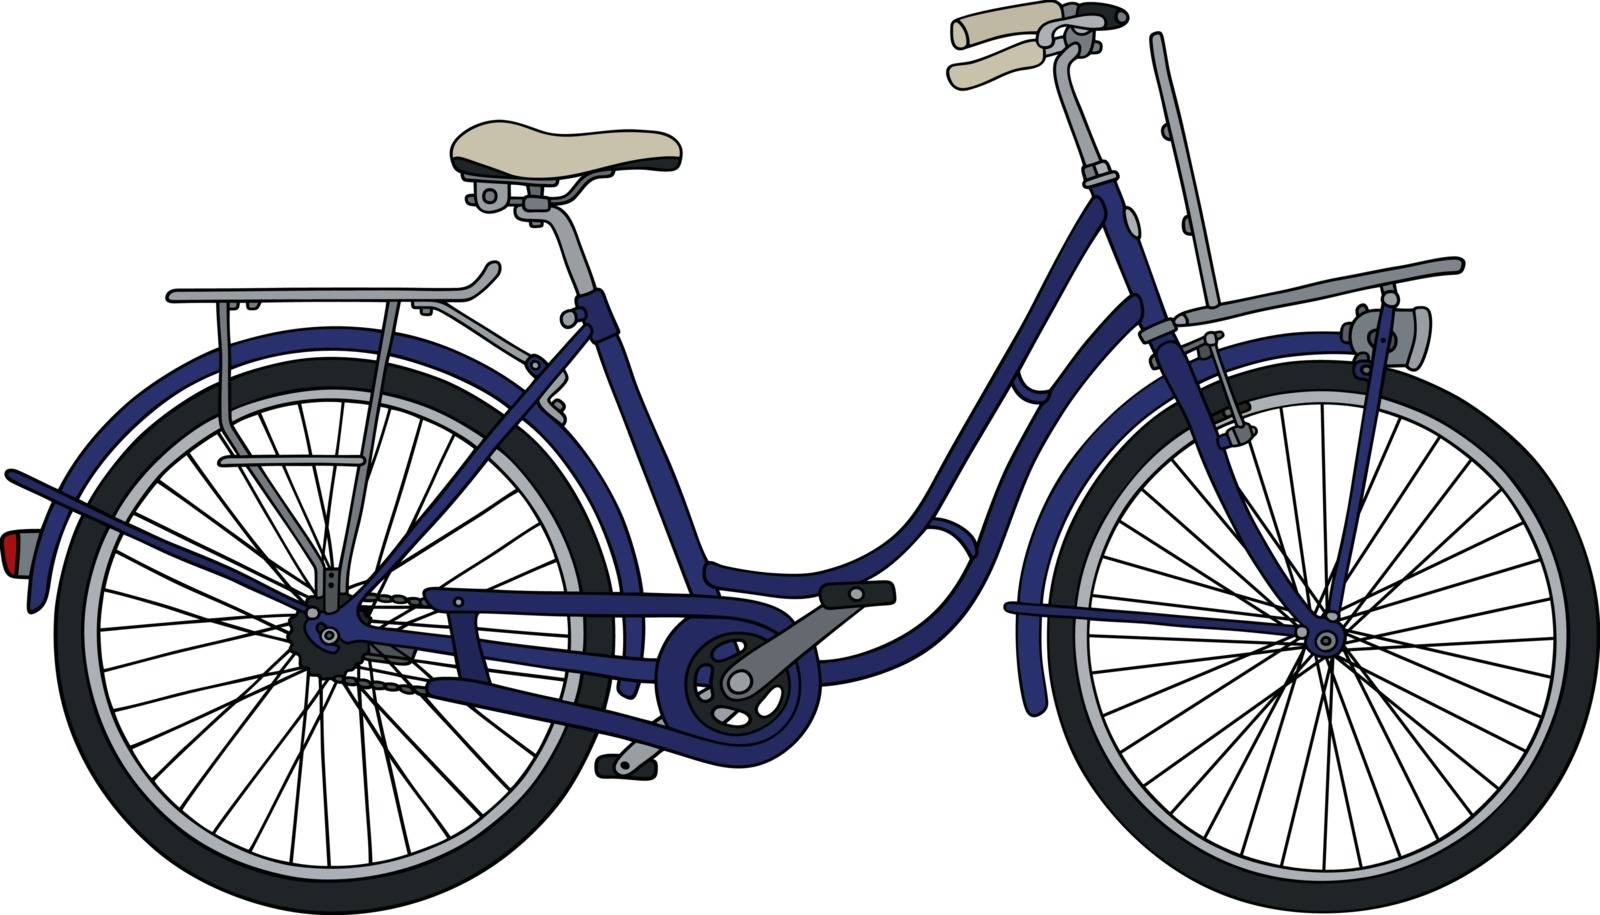 Hand drawing of a classic blue velocipede